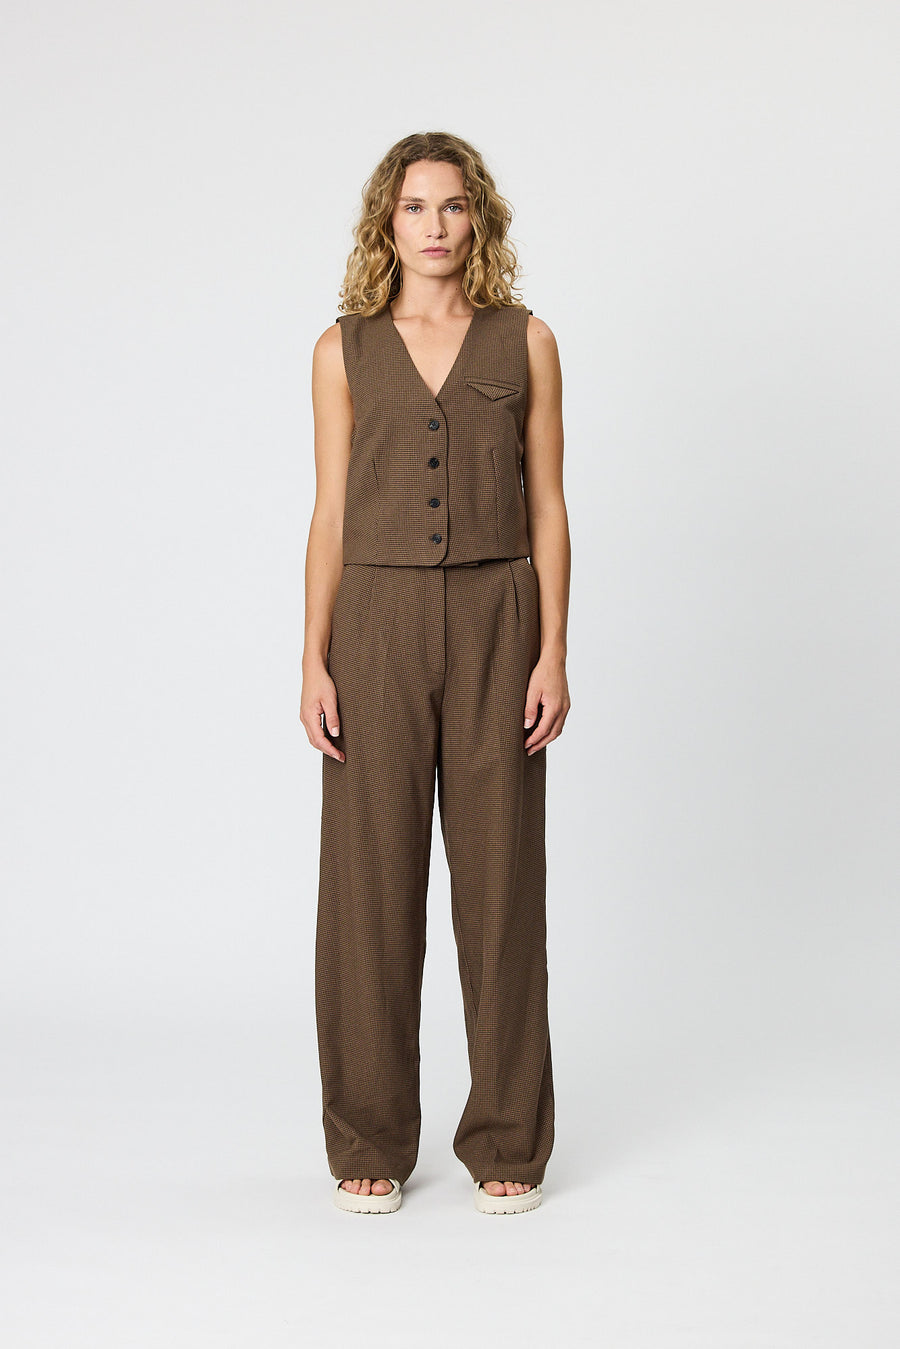 LILAH SUIT VEST - CHOCOLATE HOUNDSTOOTH